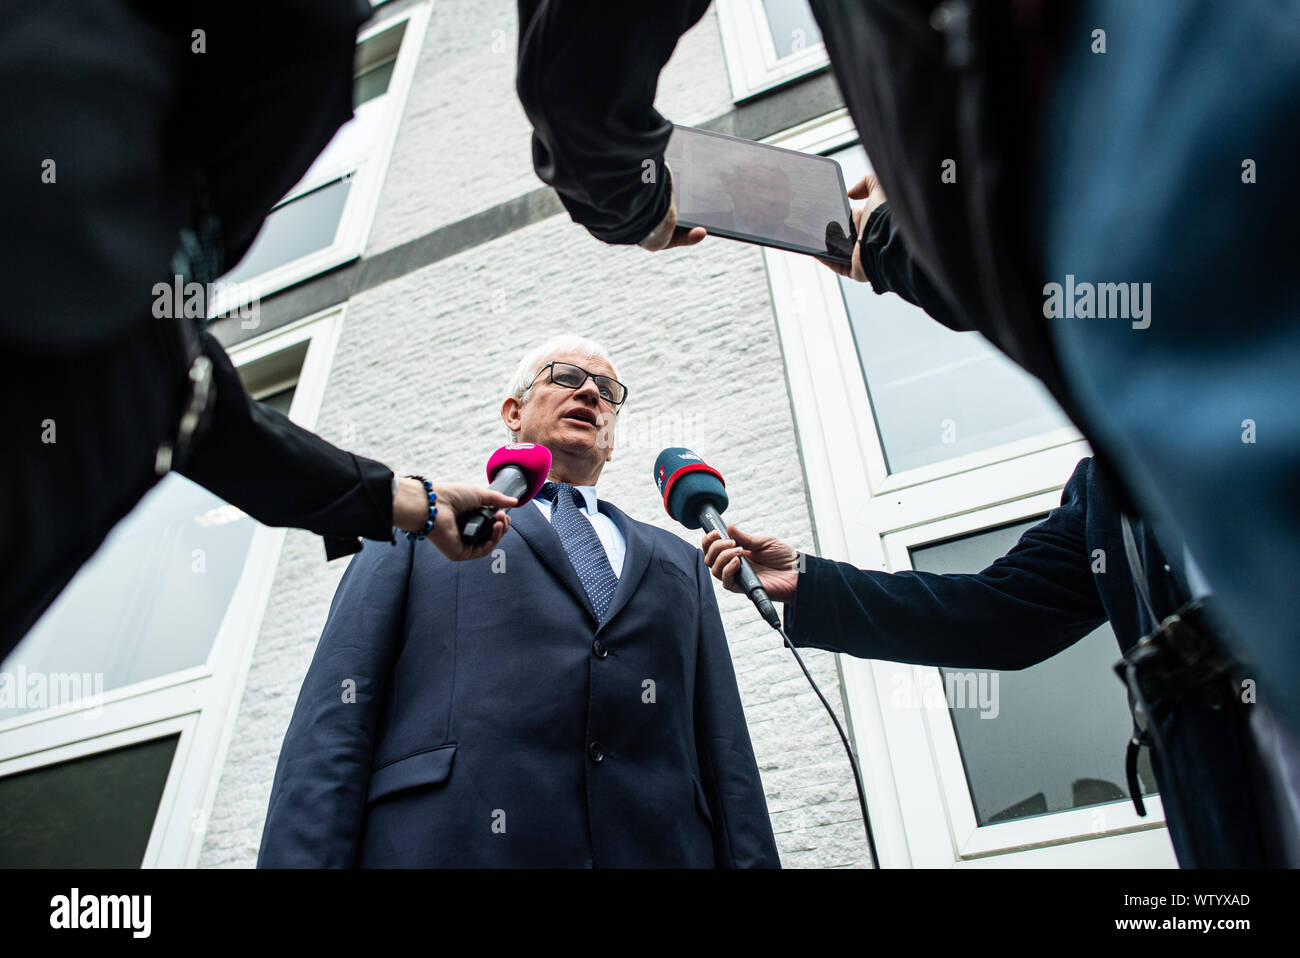 12 September 2019, North Rhine-Westphalia, Münster: Jürgen Resch, Managing Director of Deutsche Umwelthilfe, gives the media an interview before the hearing. The Higher Administrative Court for North Rhine-Westphalia (Oberverwaltungsgericht für NRW) is hearing the action brought by Deutsche Umwelthilfe. The DUH is suing for an update of the clean air plan of the district government of Cologne for the city of Cologne. The aim is to take measures to ensure that the limit values for nitrogen dioxide are complied with as quickly as possible. It is controversial whether driving bans for diesel vehi Stock Photo